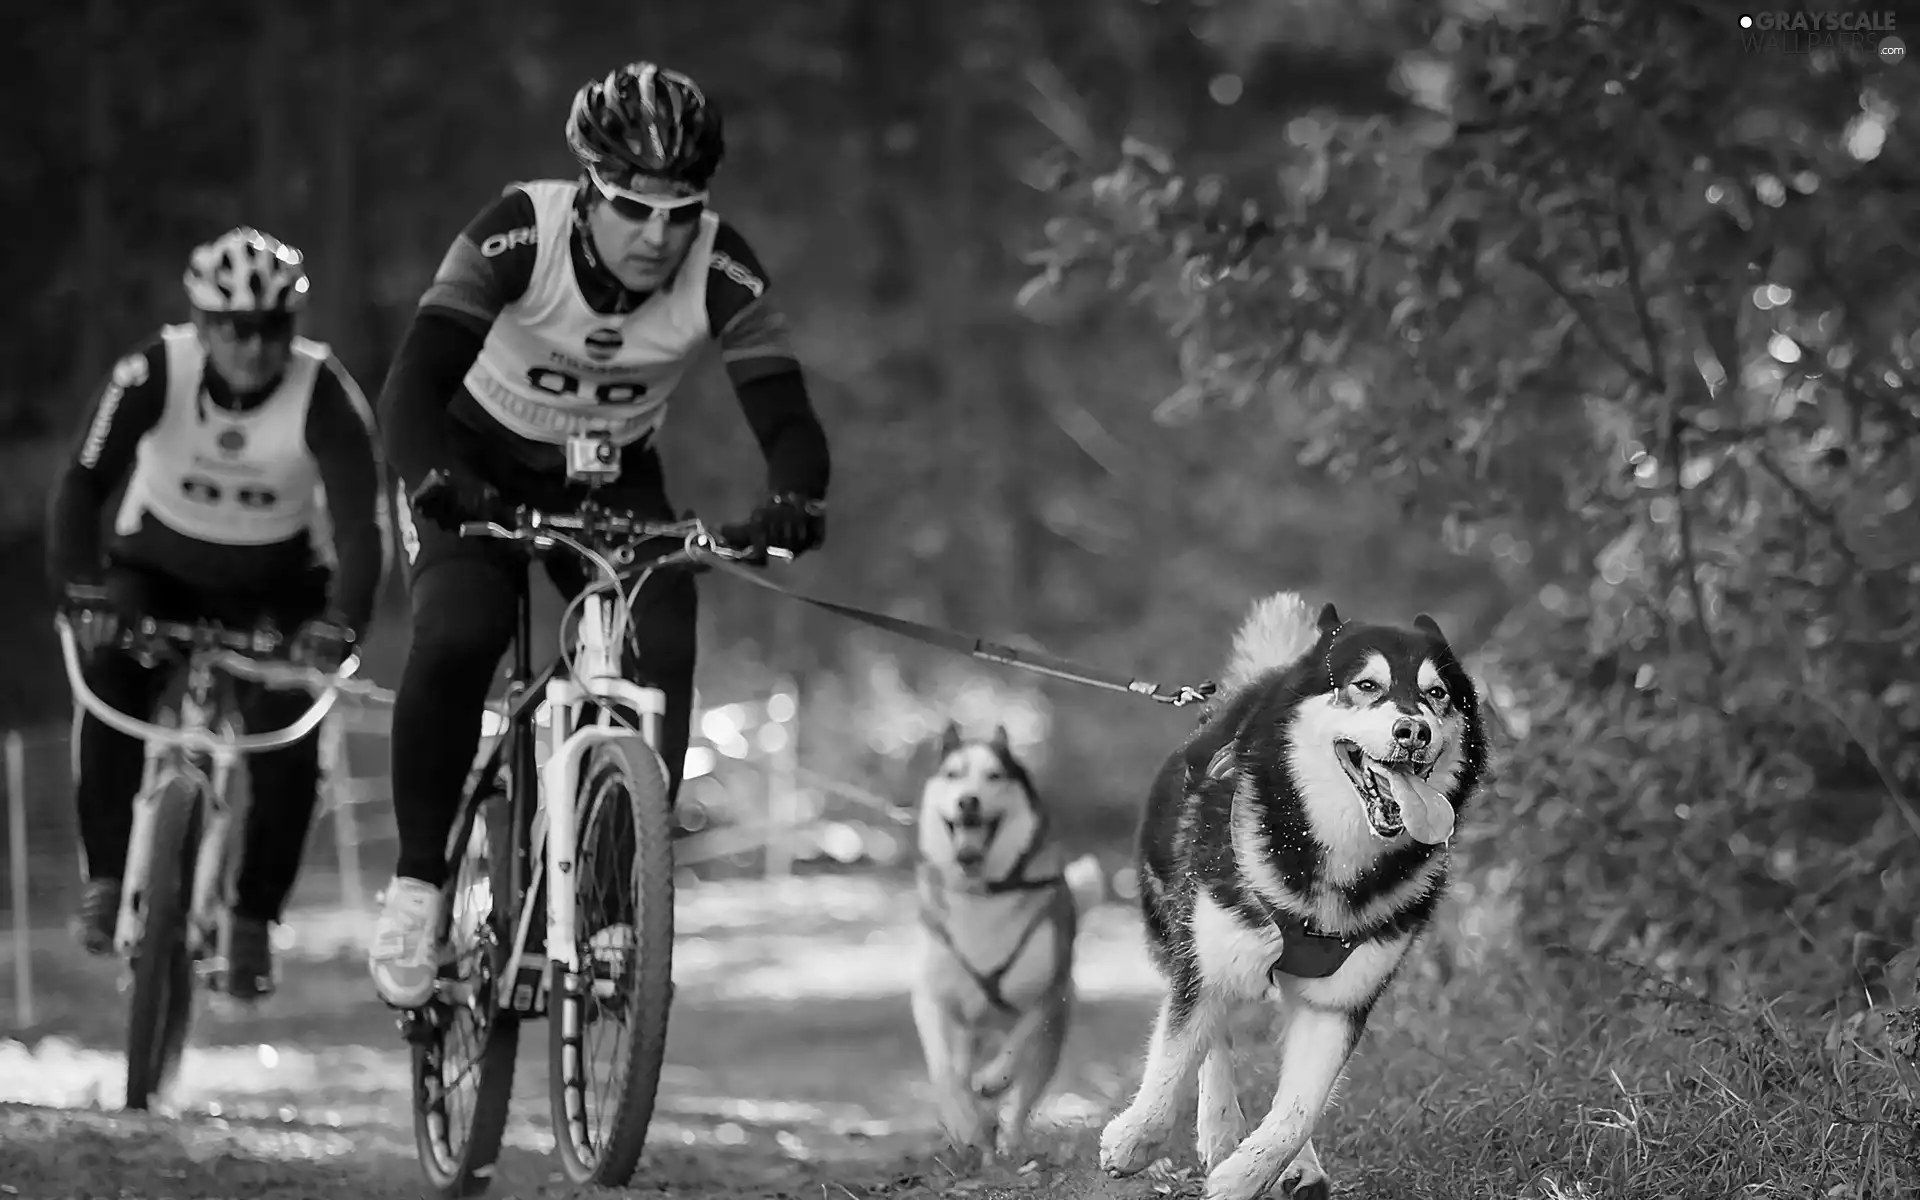 cyclists, Husky, forest, Dogs